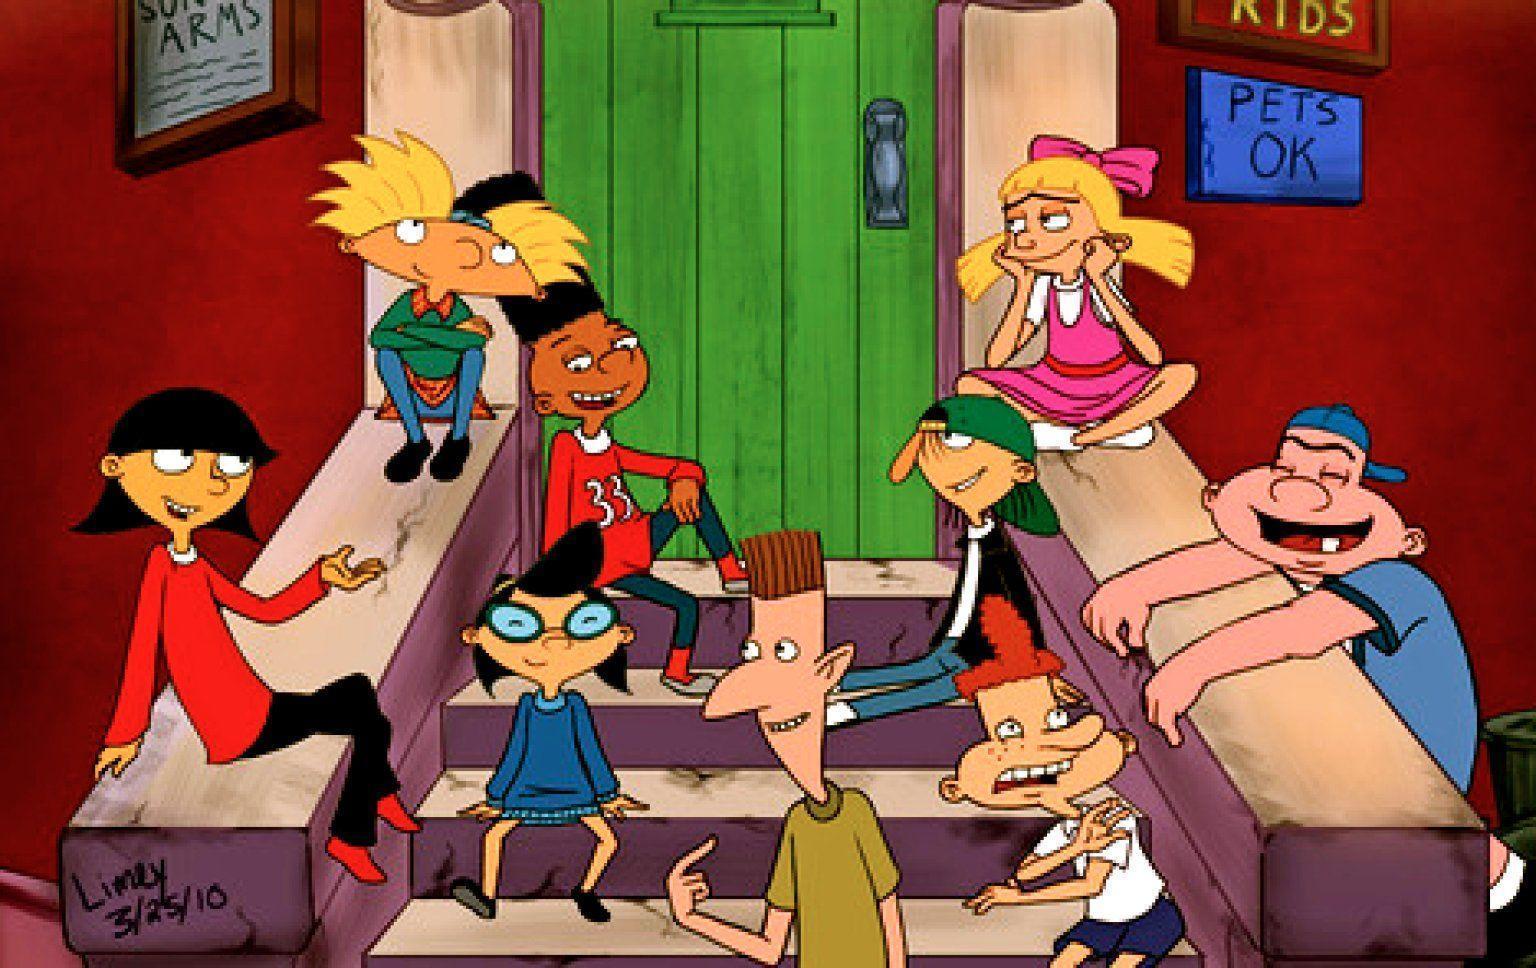 Staff Beef: Why Hey Arnold Deserves the Championship Belt